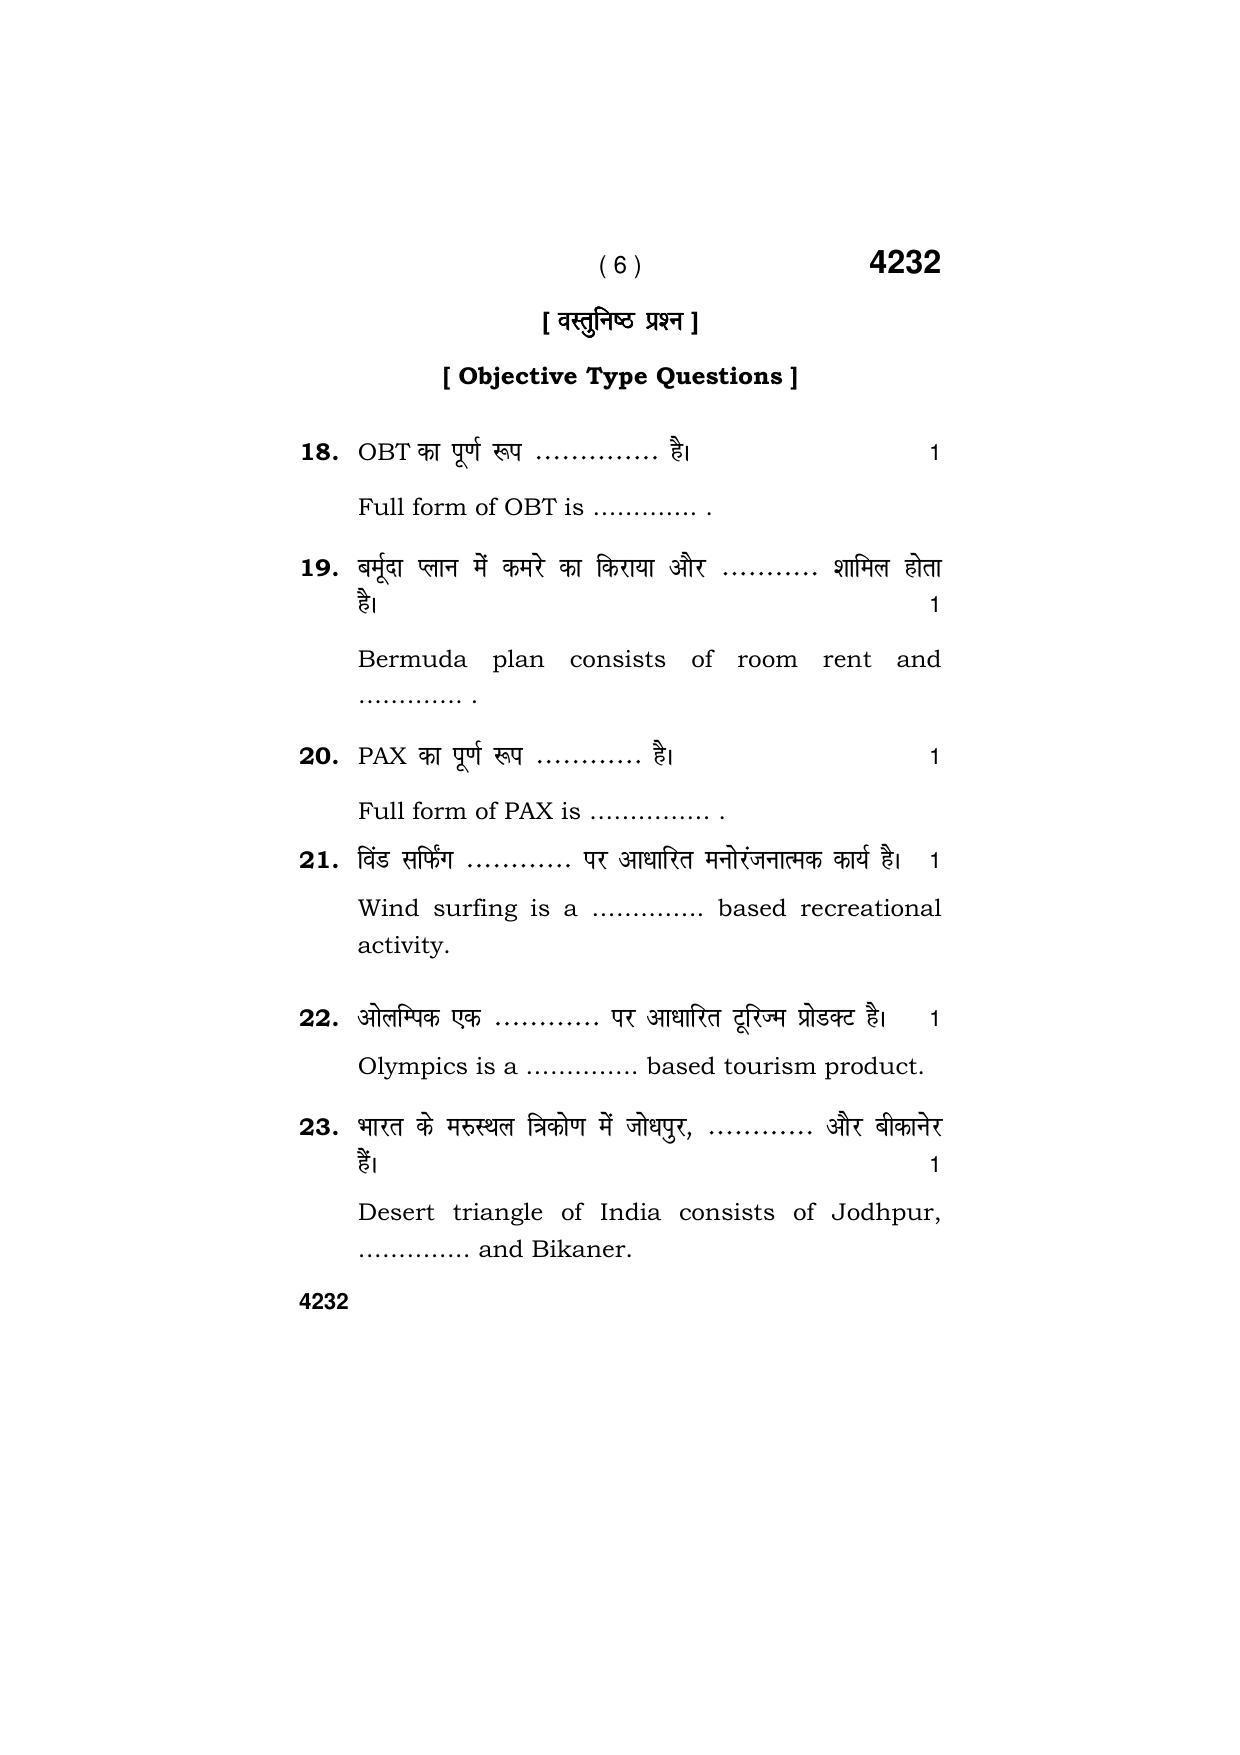 Haryana Board HBSE Class 10 Tourism -Hospitality 2019 Question Paper - Page 6